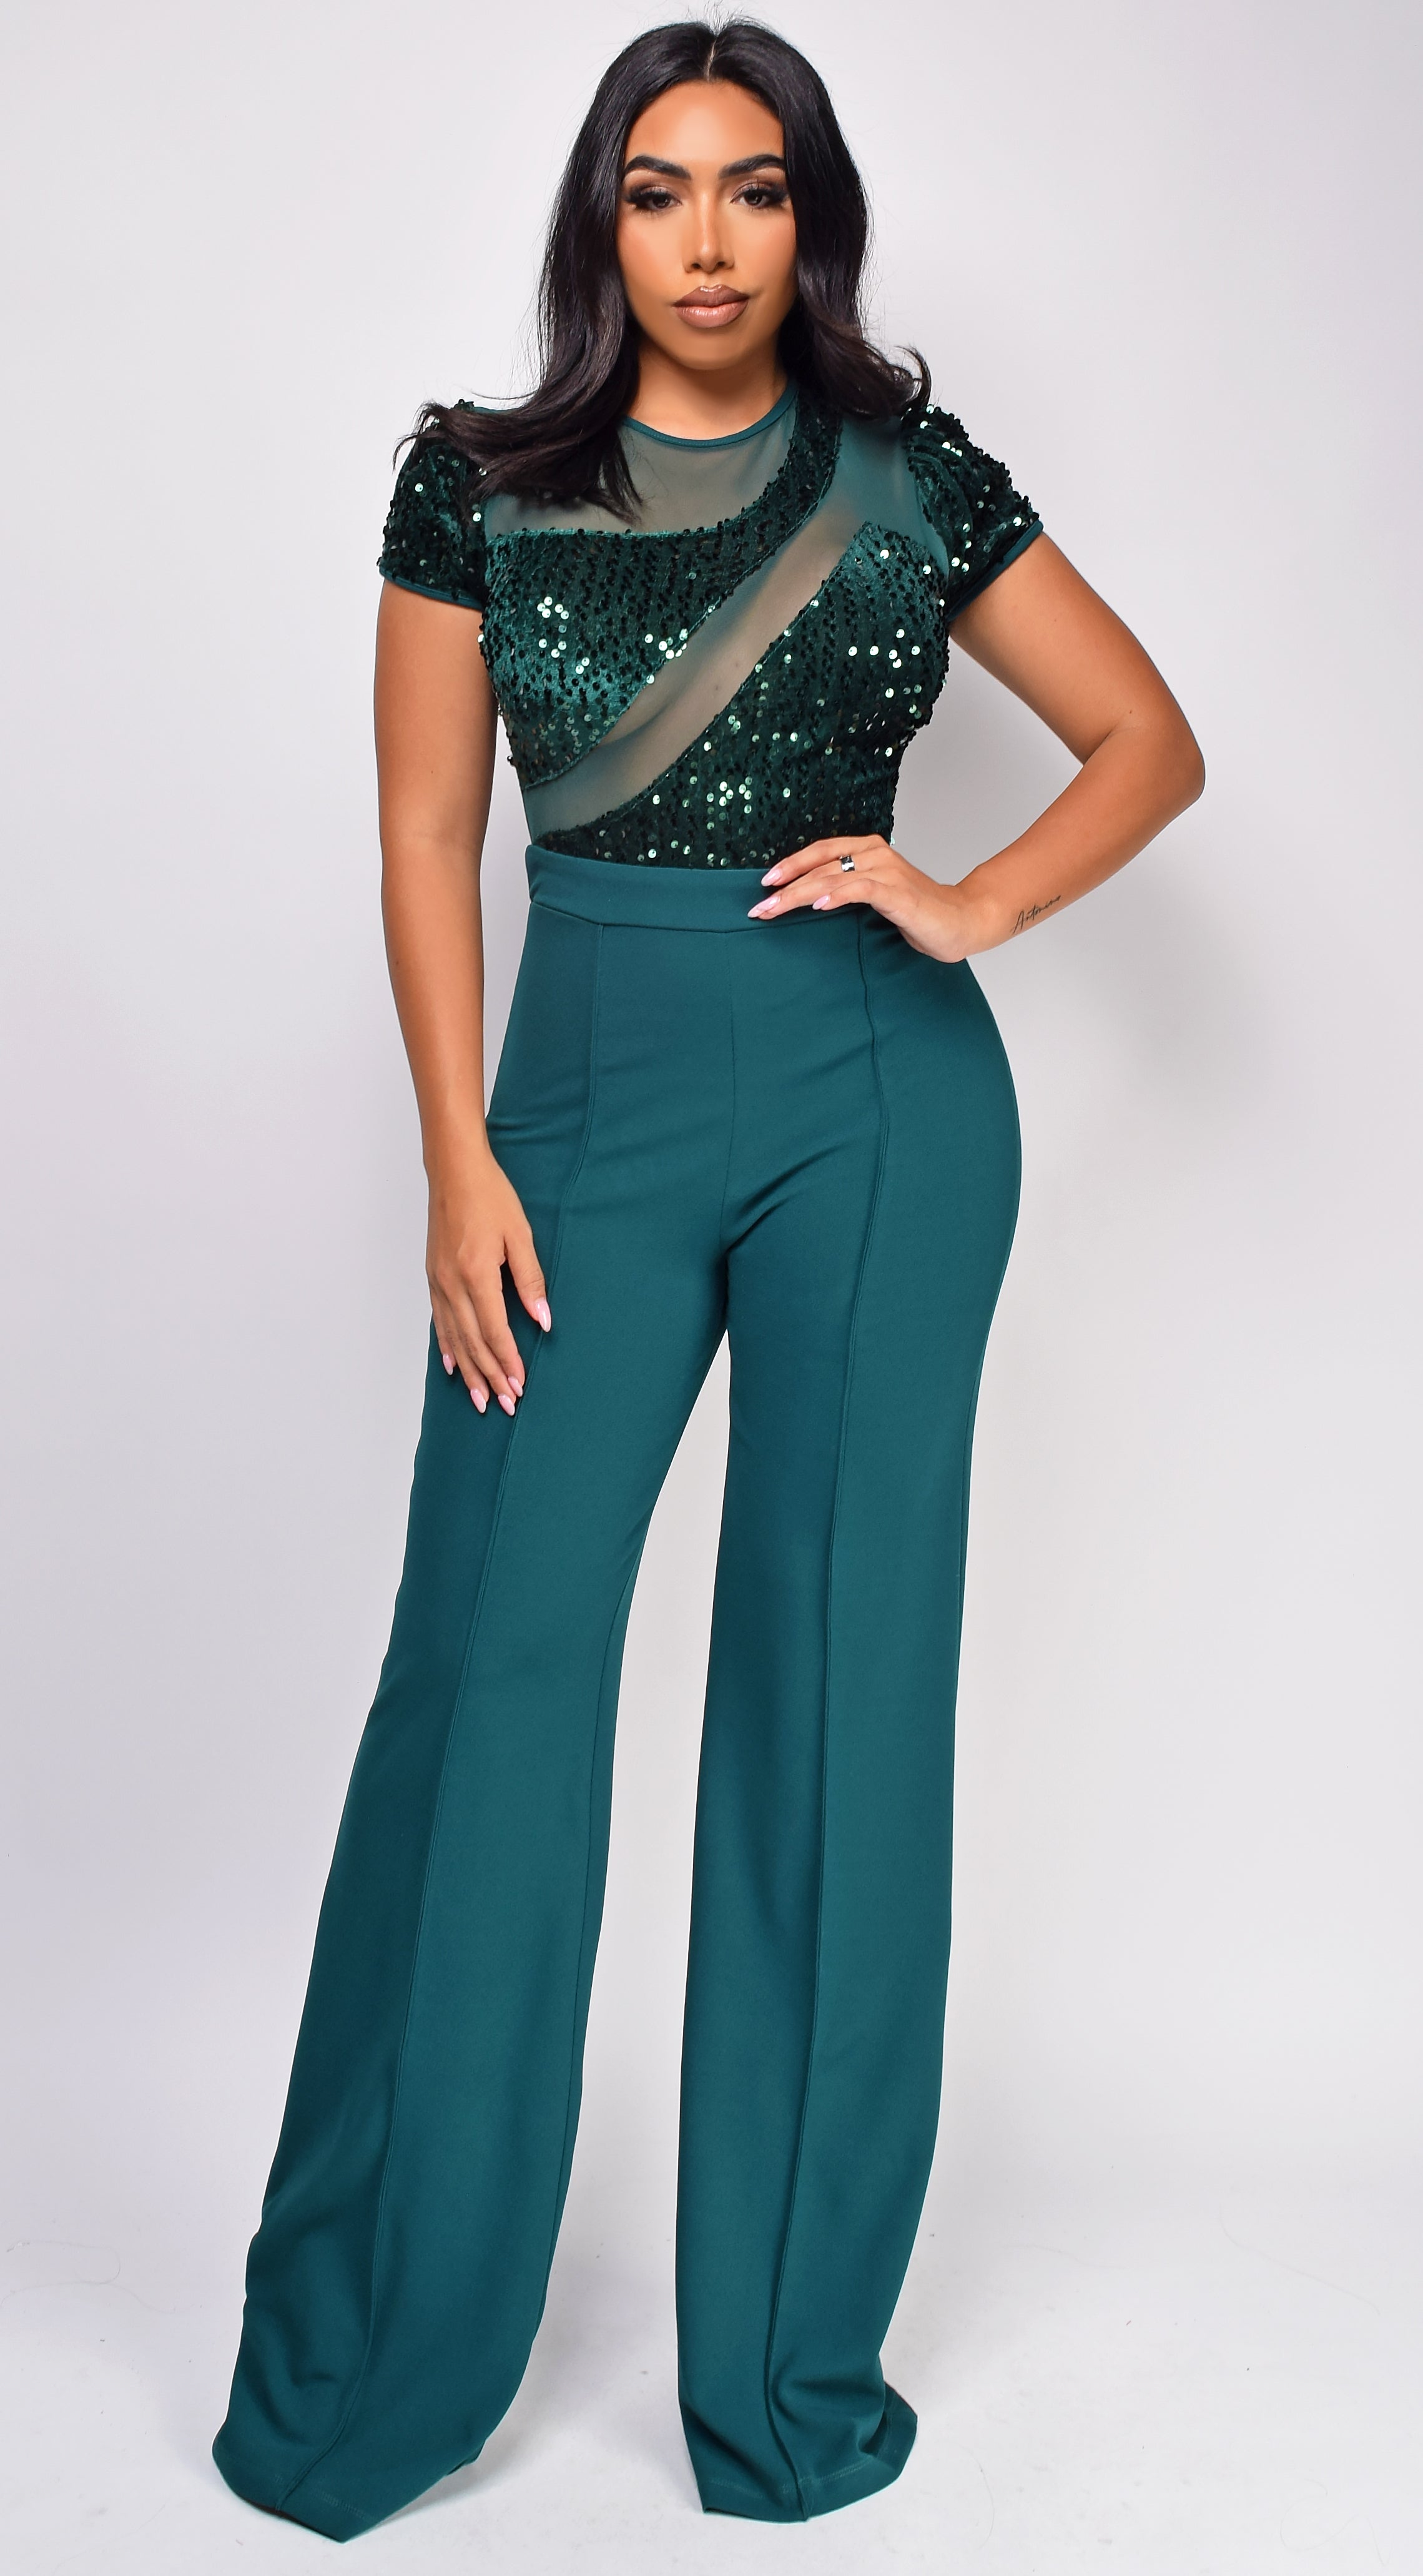 Modest Hunter Green Lace Appliqued Long Sleeve Jumpsuit Formal For Mother  Of The Bride/Prom Long Sleeves, Perfect For Evening Events PRO232 From  Promotionspace, $132.41 | DHgate.Com